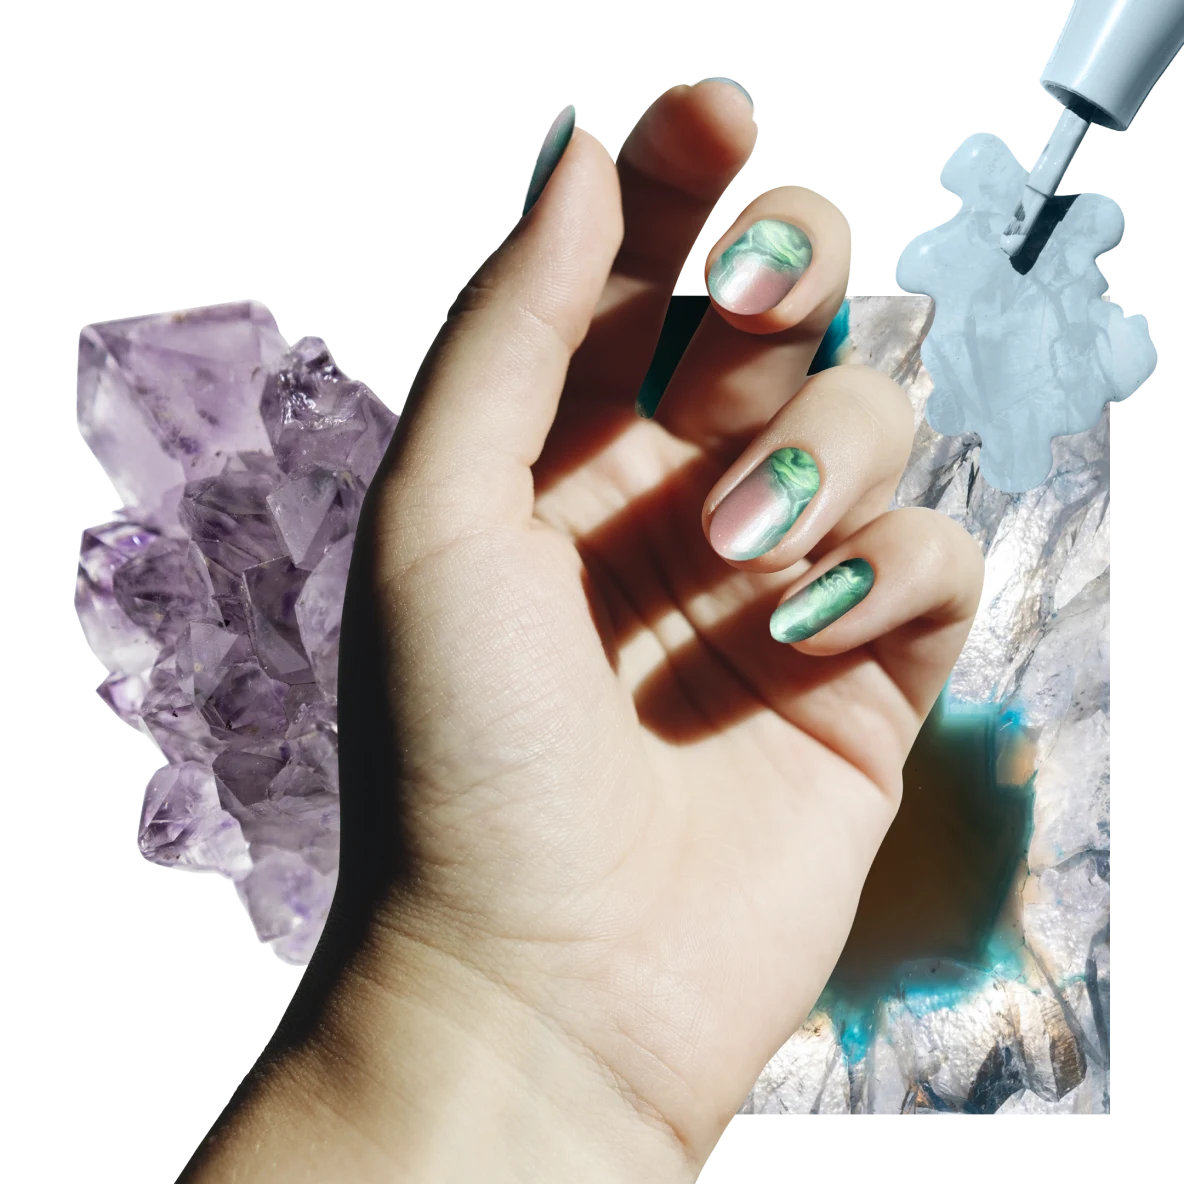 White hand rests on top of purple, light blue and crystal patterns. Light blue nail polish at right.